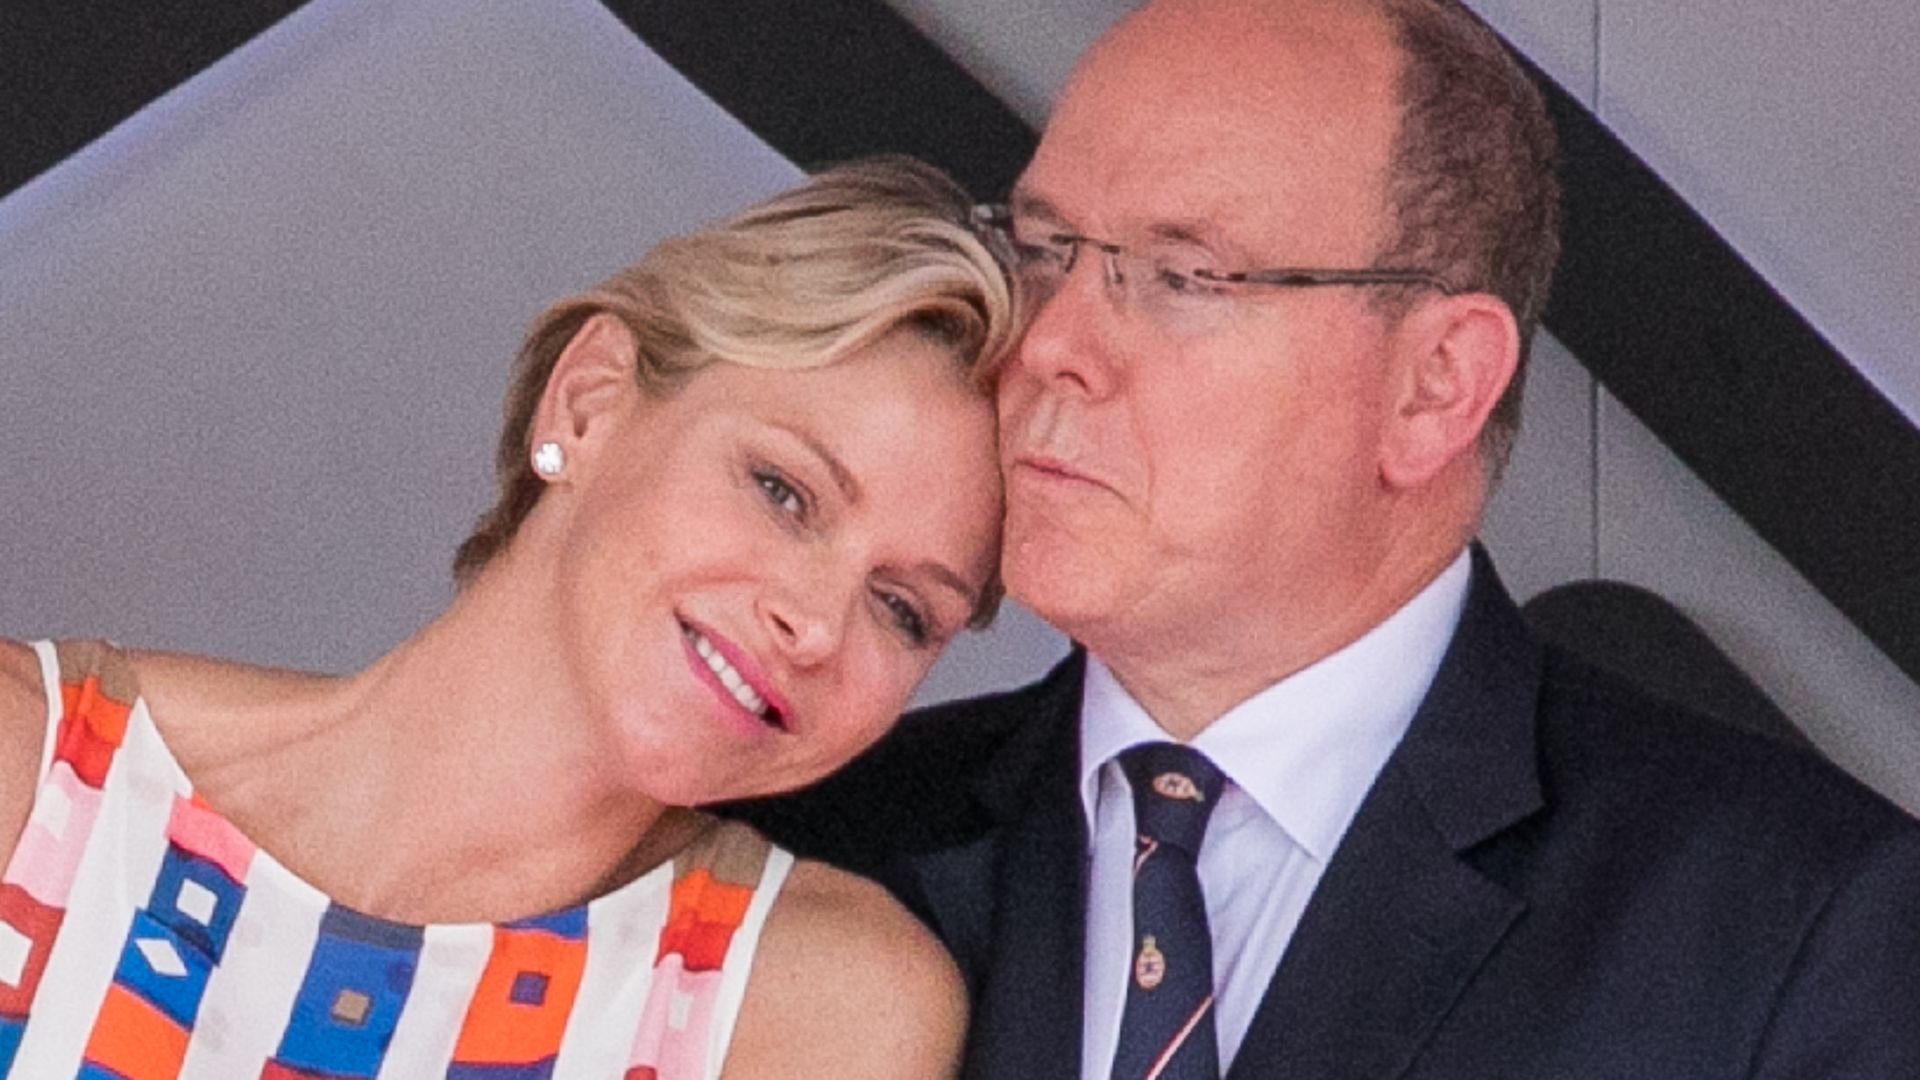 Princess Charlene leaning in for a cuddle with husband Prince Albert